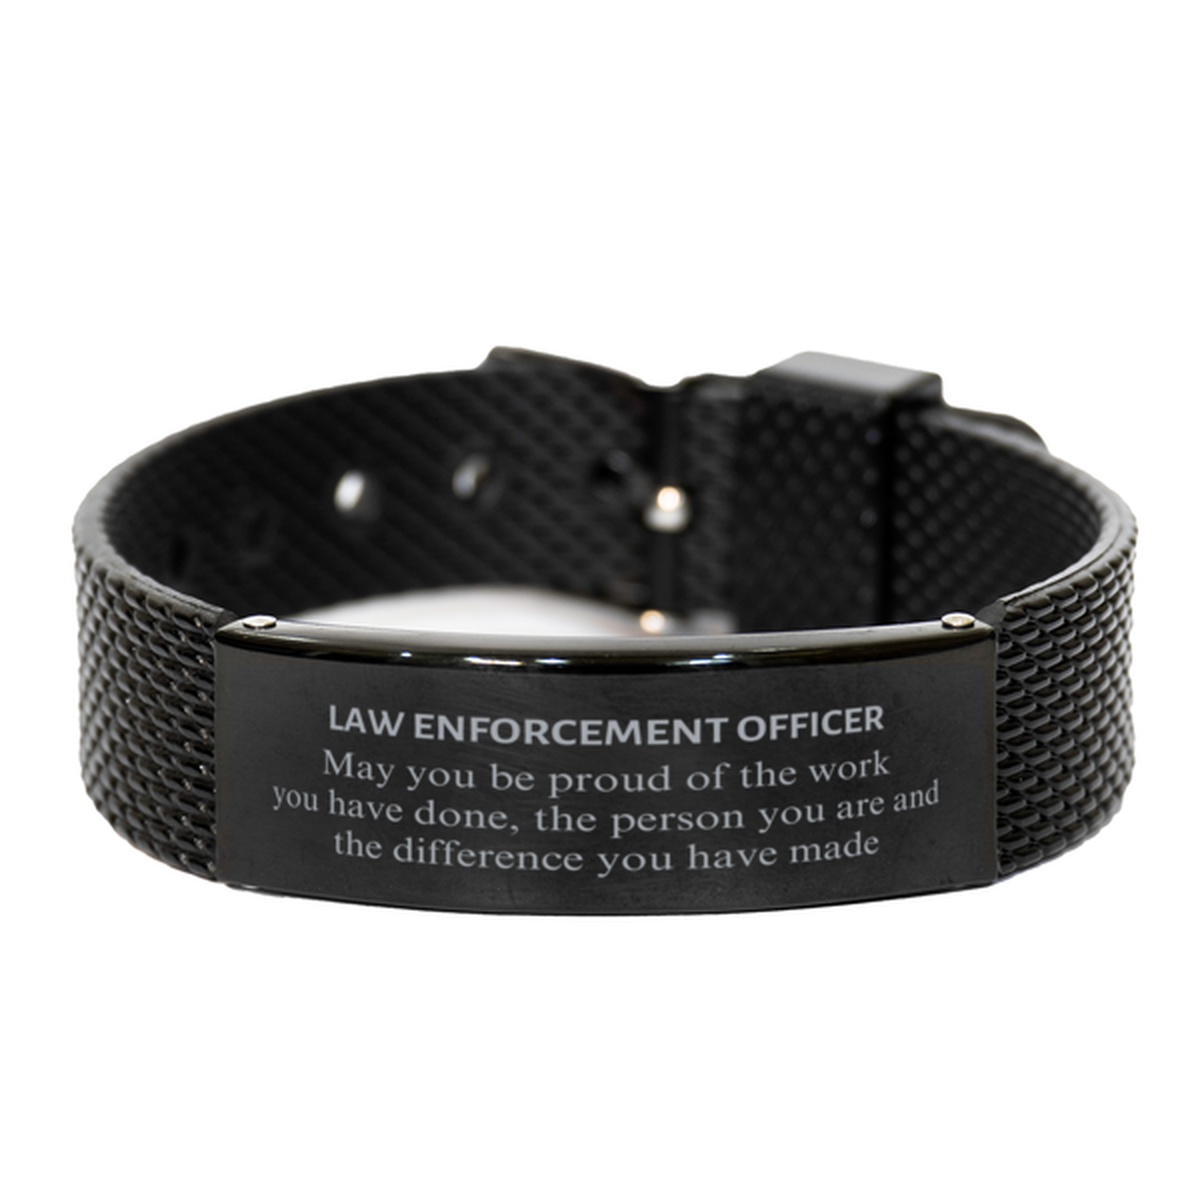 Law Enforcement Officer May you be proud of the work you have done, Retirement Law Enforcement Officer Black Shark Mesh Bracelet for Colleague Appreciation Gifts Amazing for Law Enforcement Officer